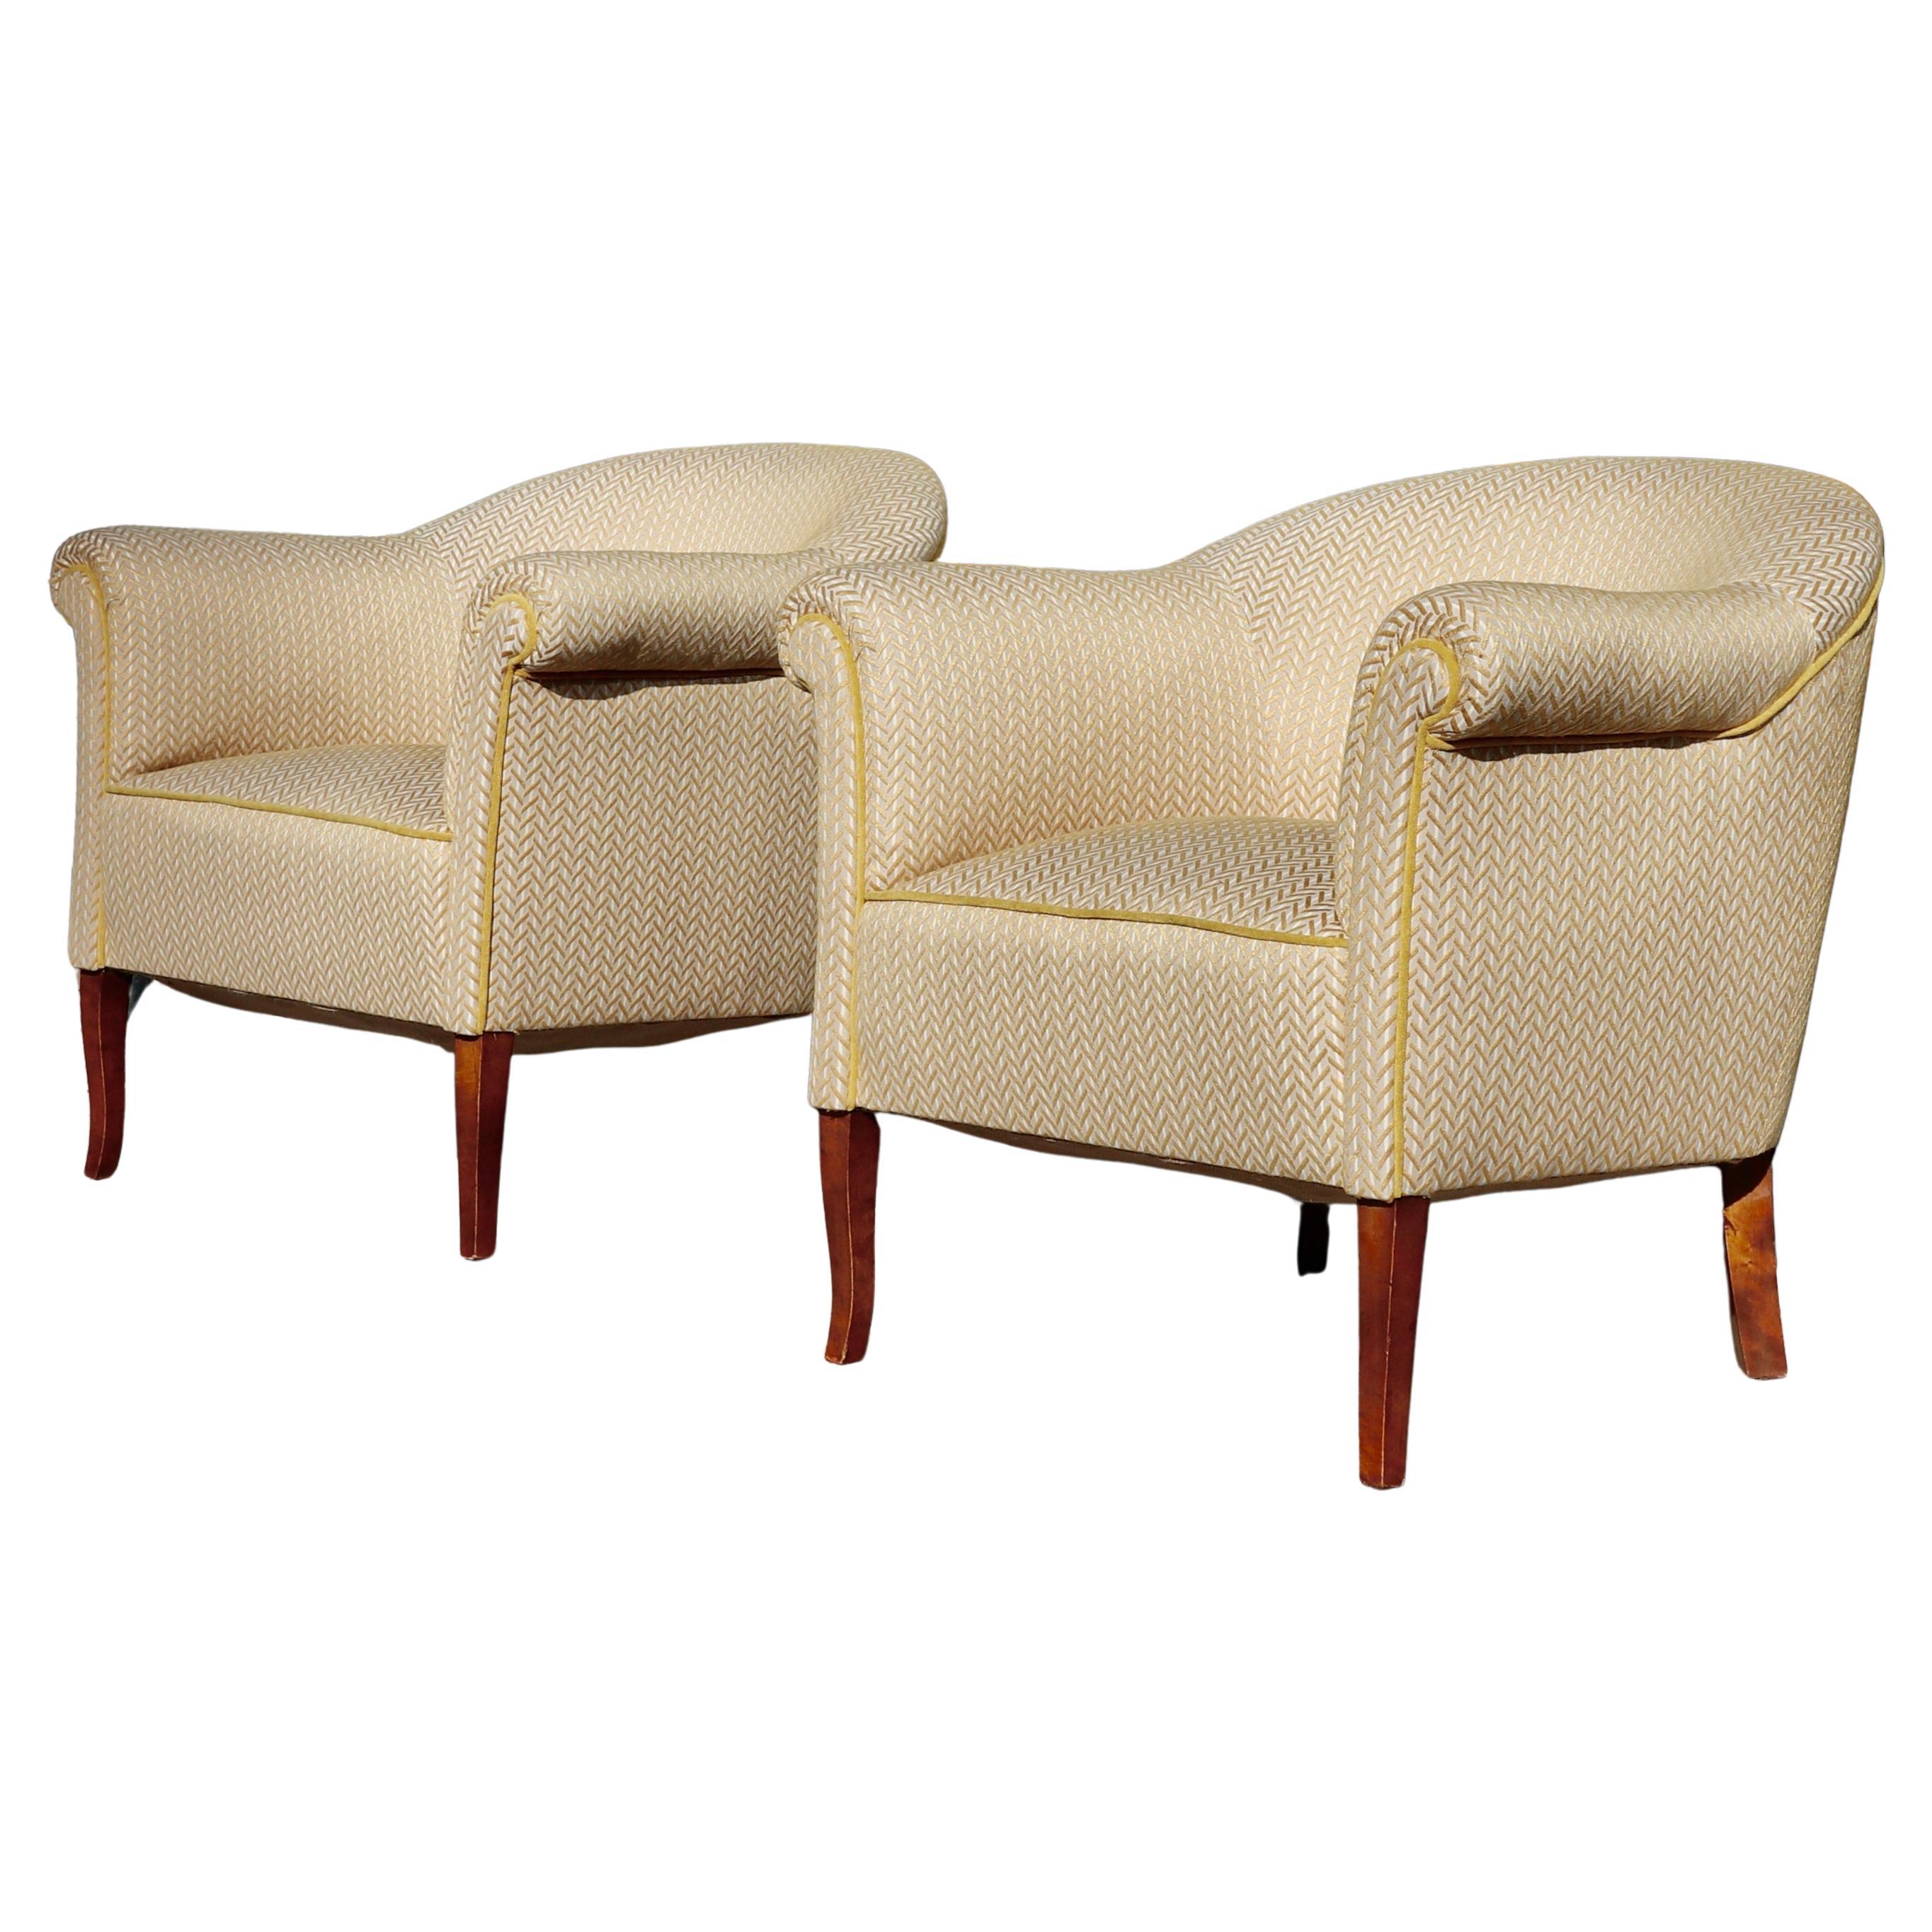 Pair of 1950s Swedish For Sale